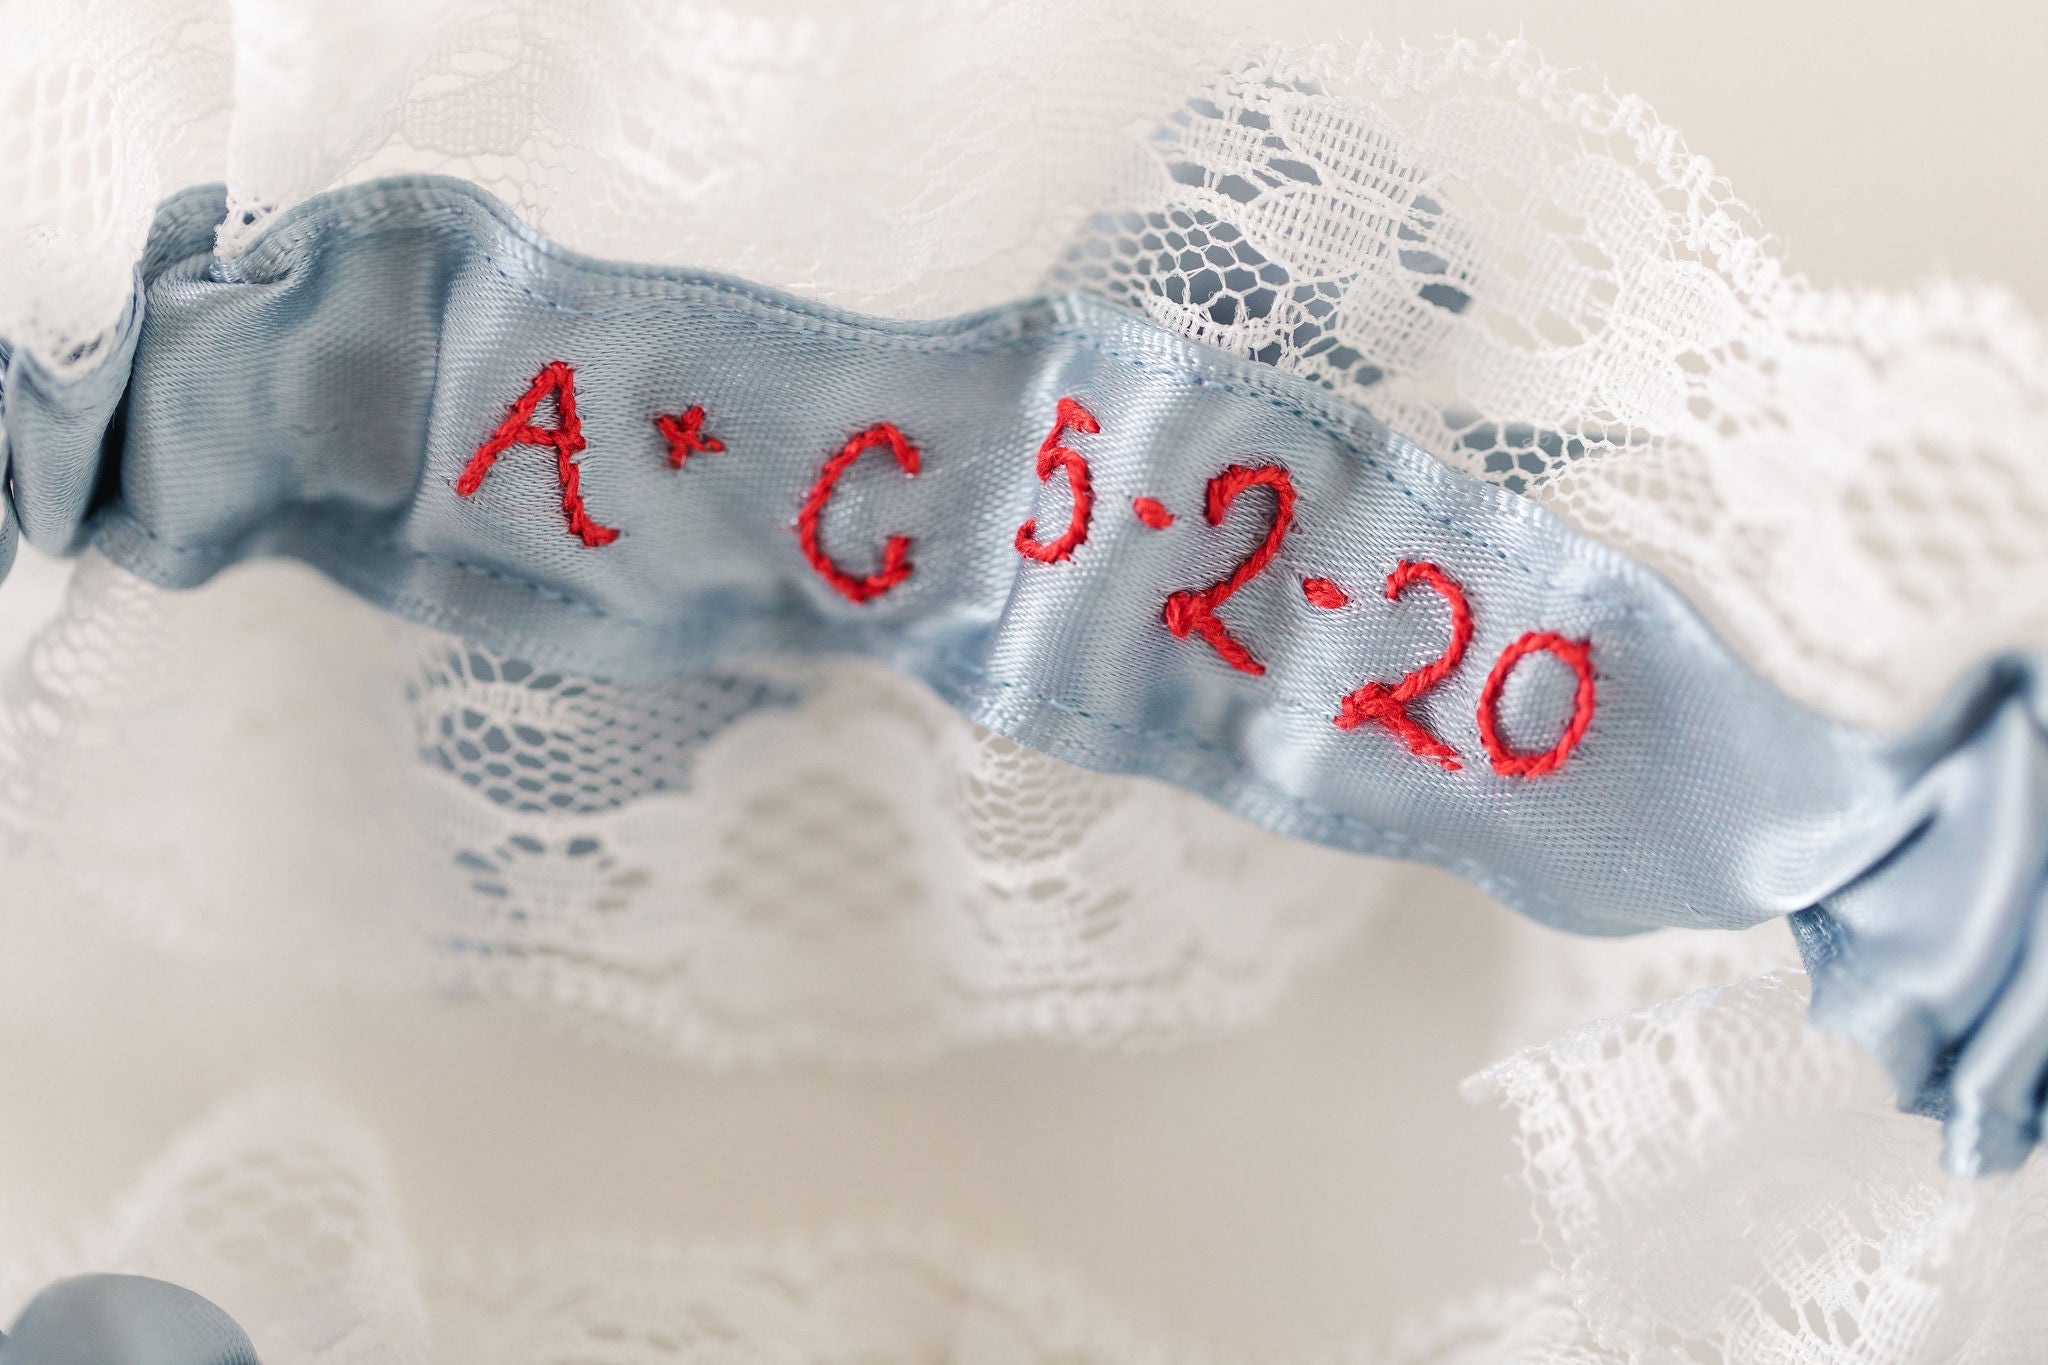 custom lace wedding garter set with personalized embroidery handmade by The Garter Girl